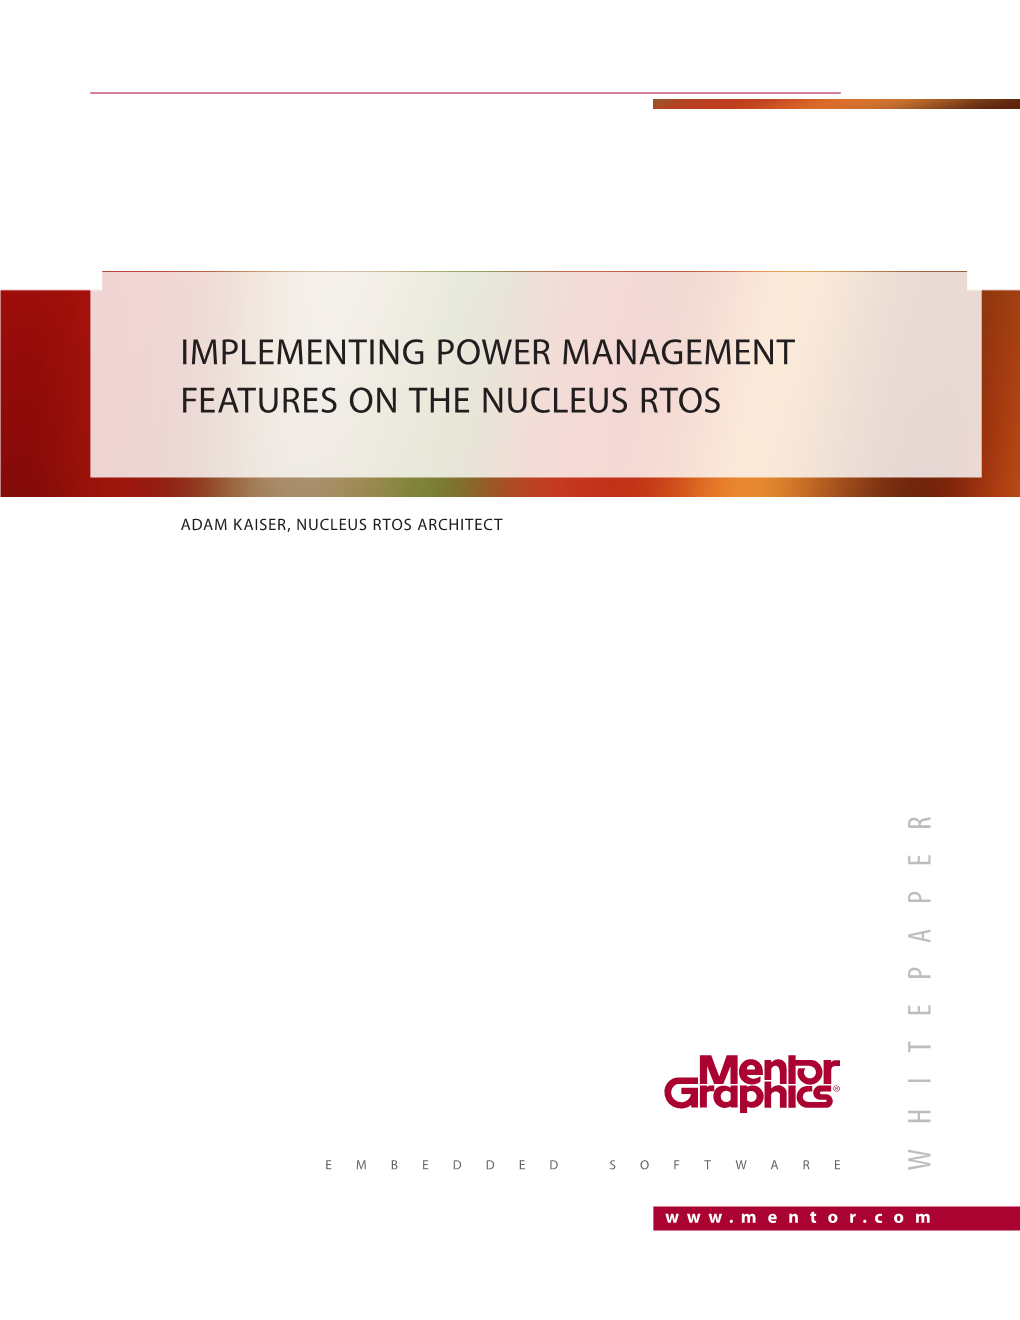 Implementing Power Management Features on the Nucleus Rtos